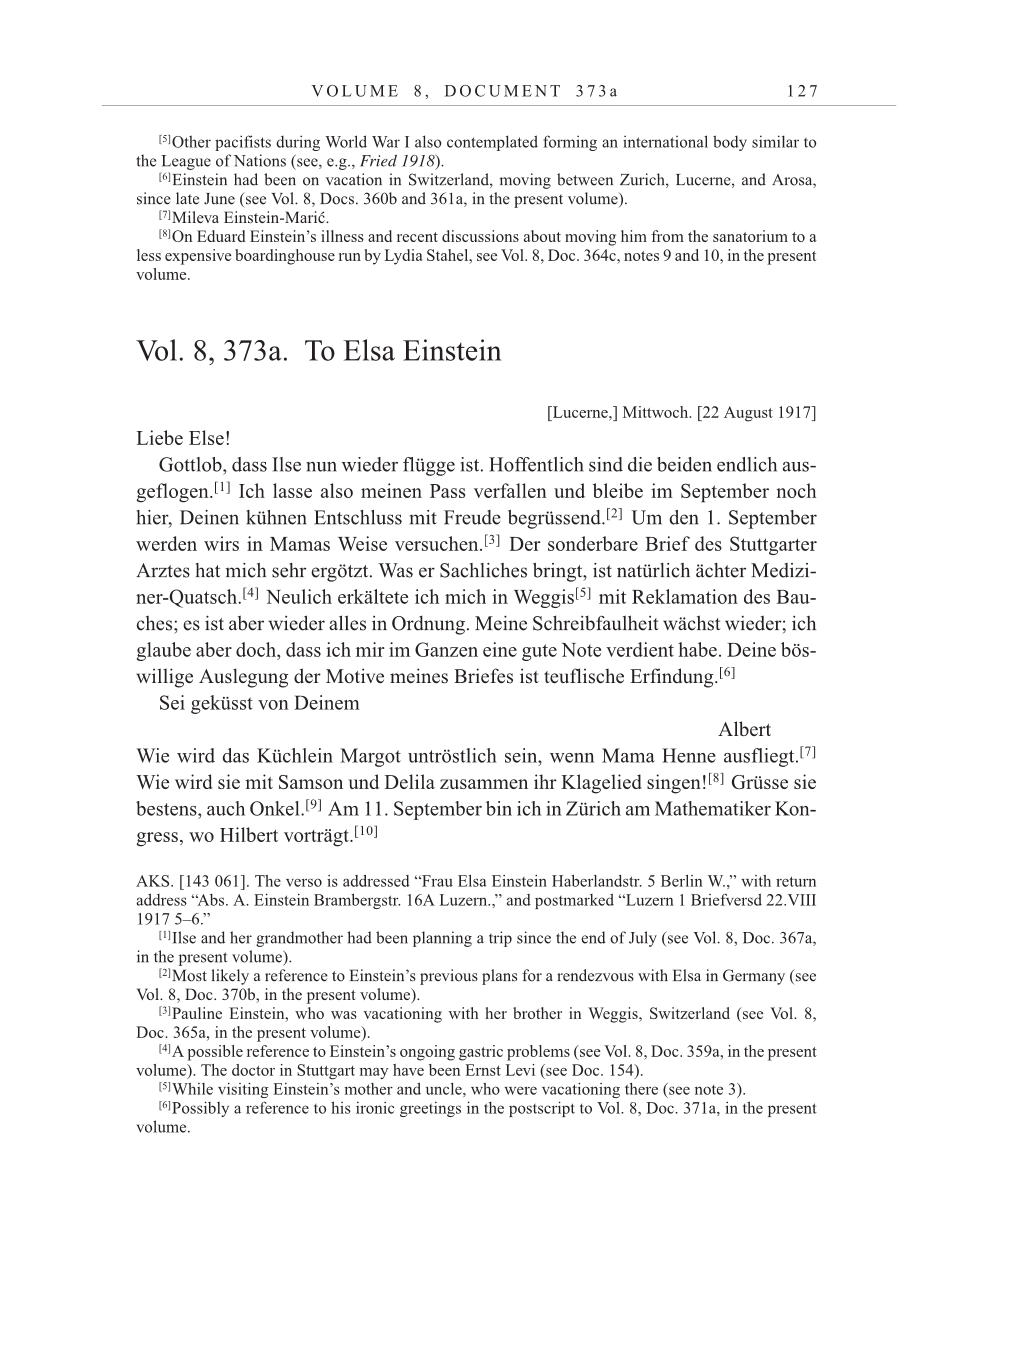 Volume 10: The Berlin Years: Correspondence May-December 1920 / Supplementary Correspondence 1909-1920 page 127